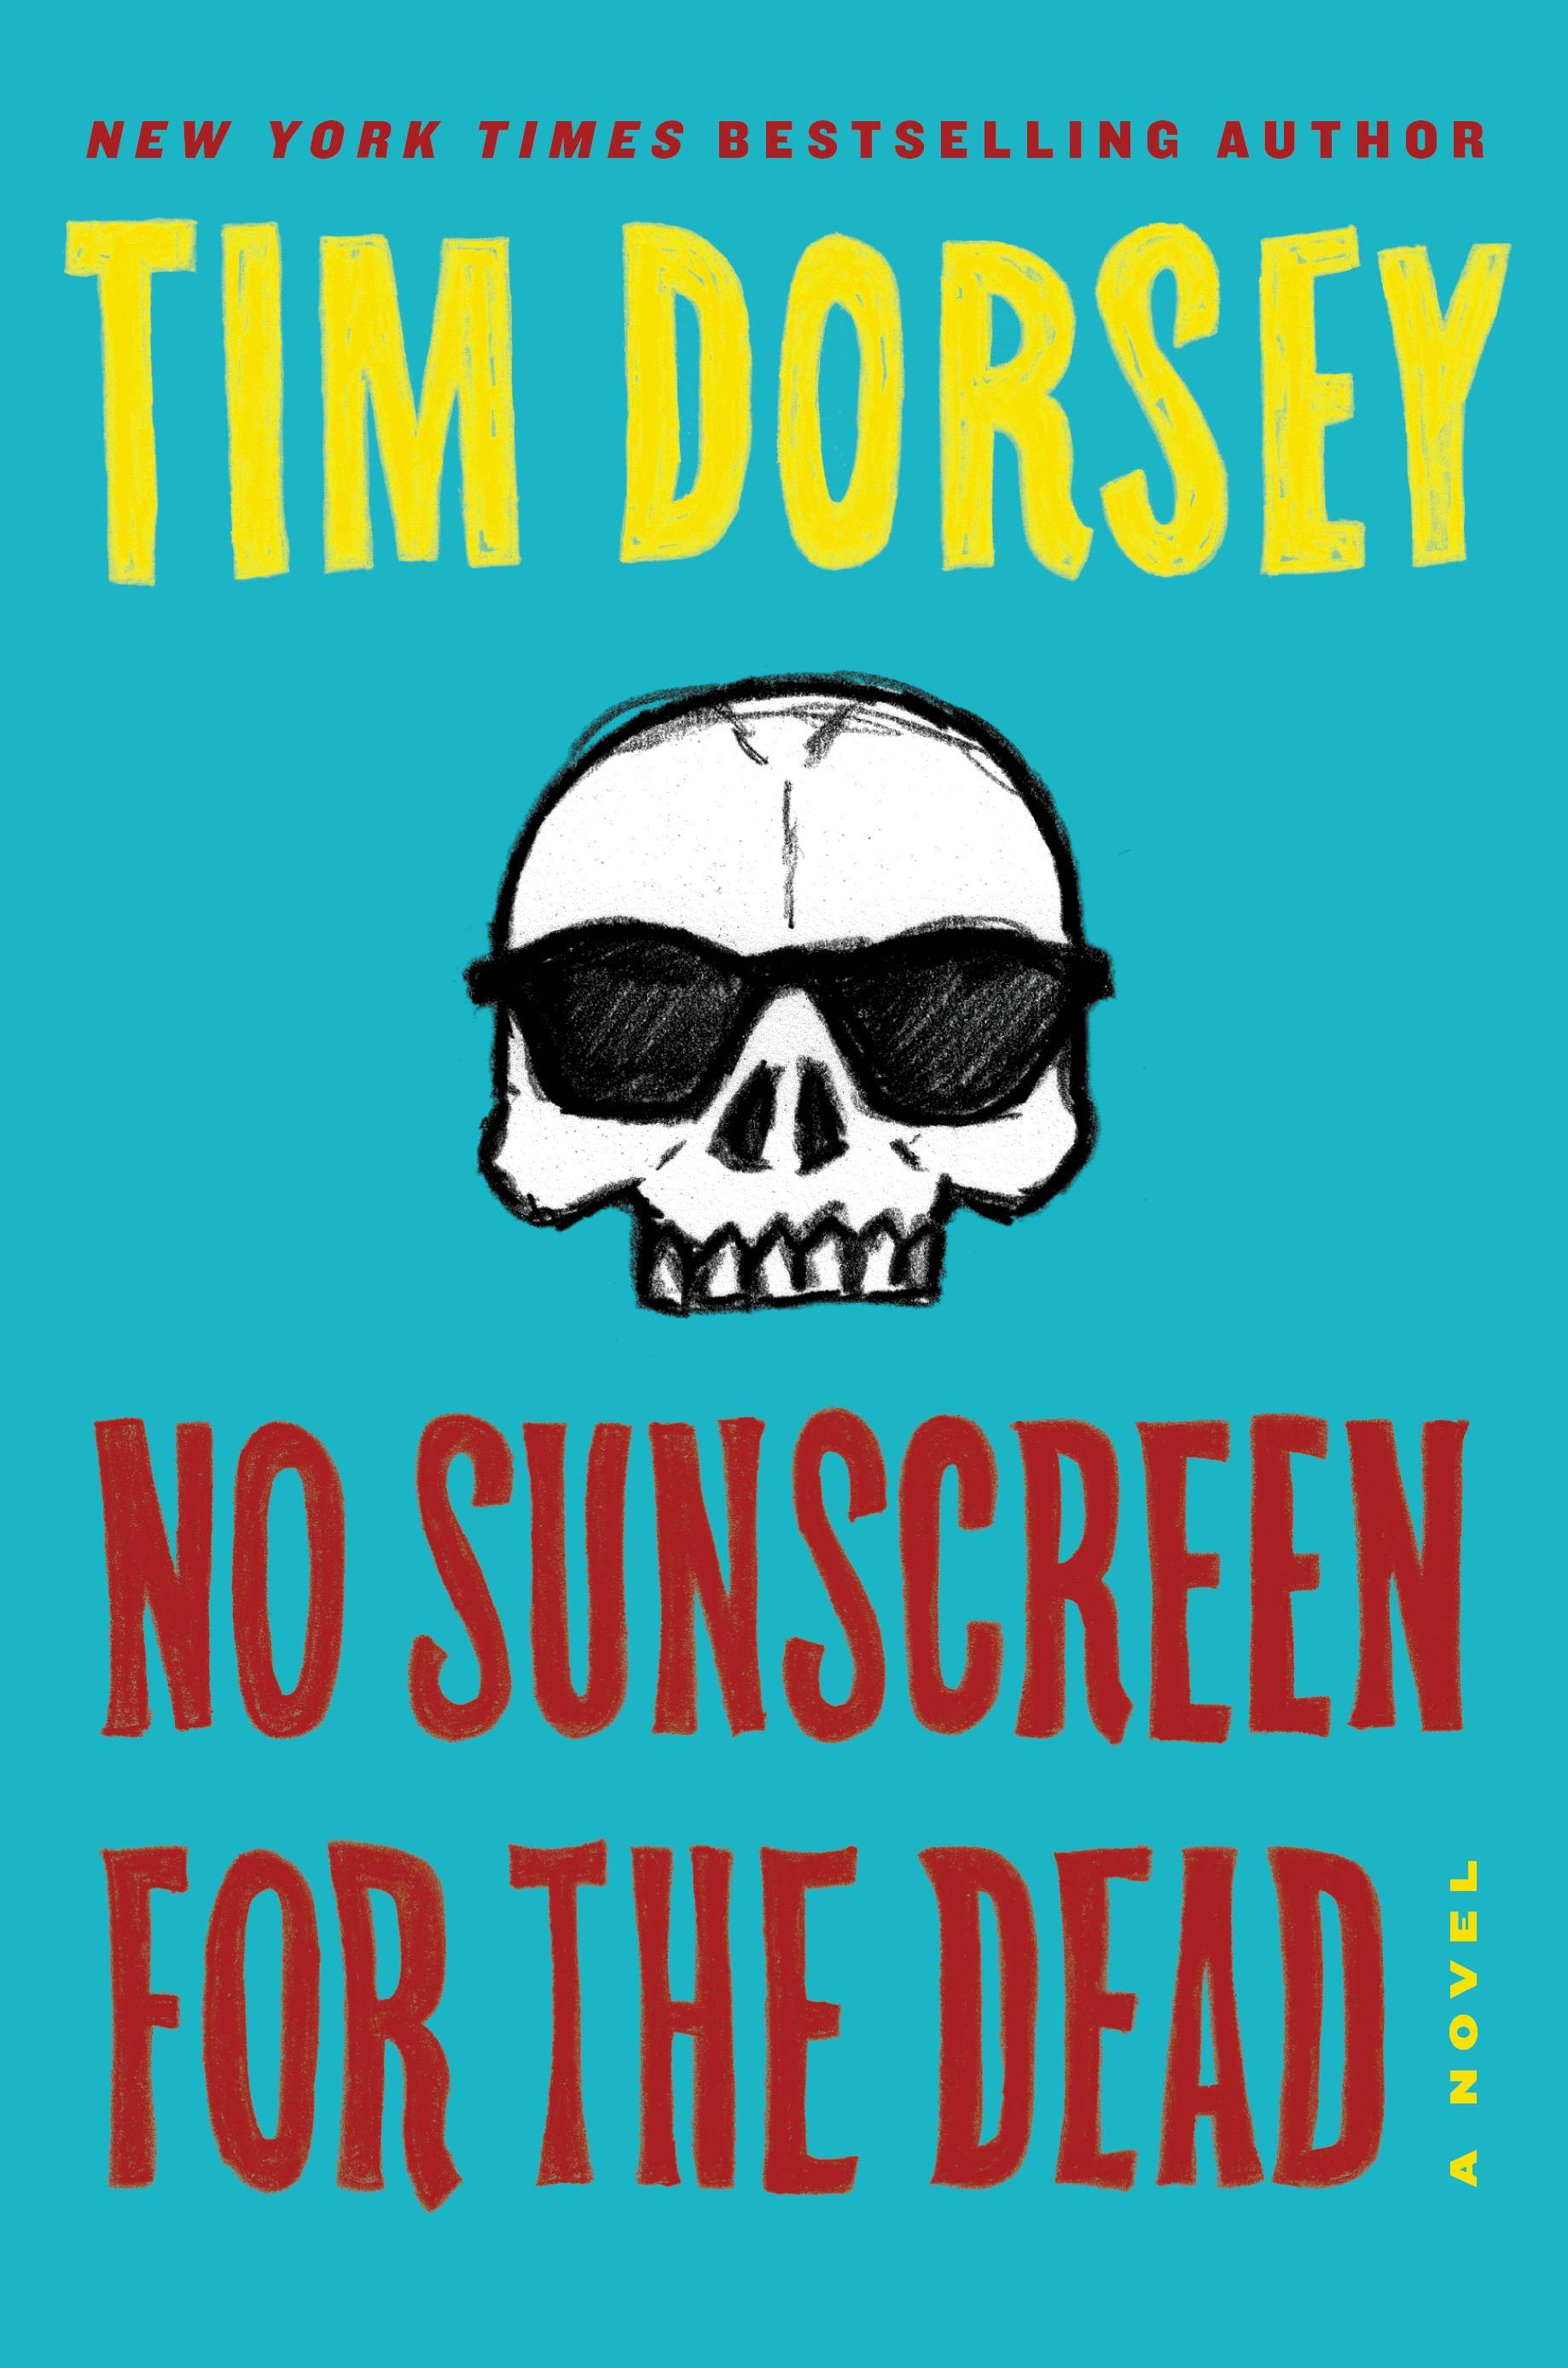 Bookworm Sez: ‘No Sunscreen for the Dead’ — Hilarity with a side of mystery